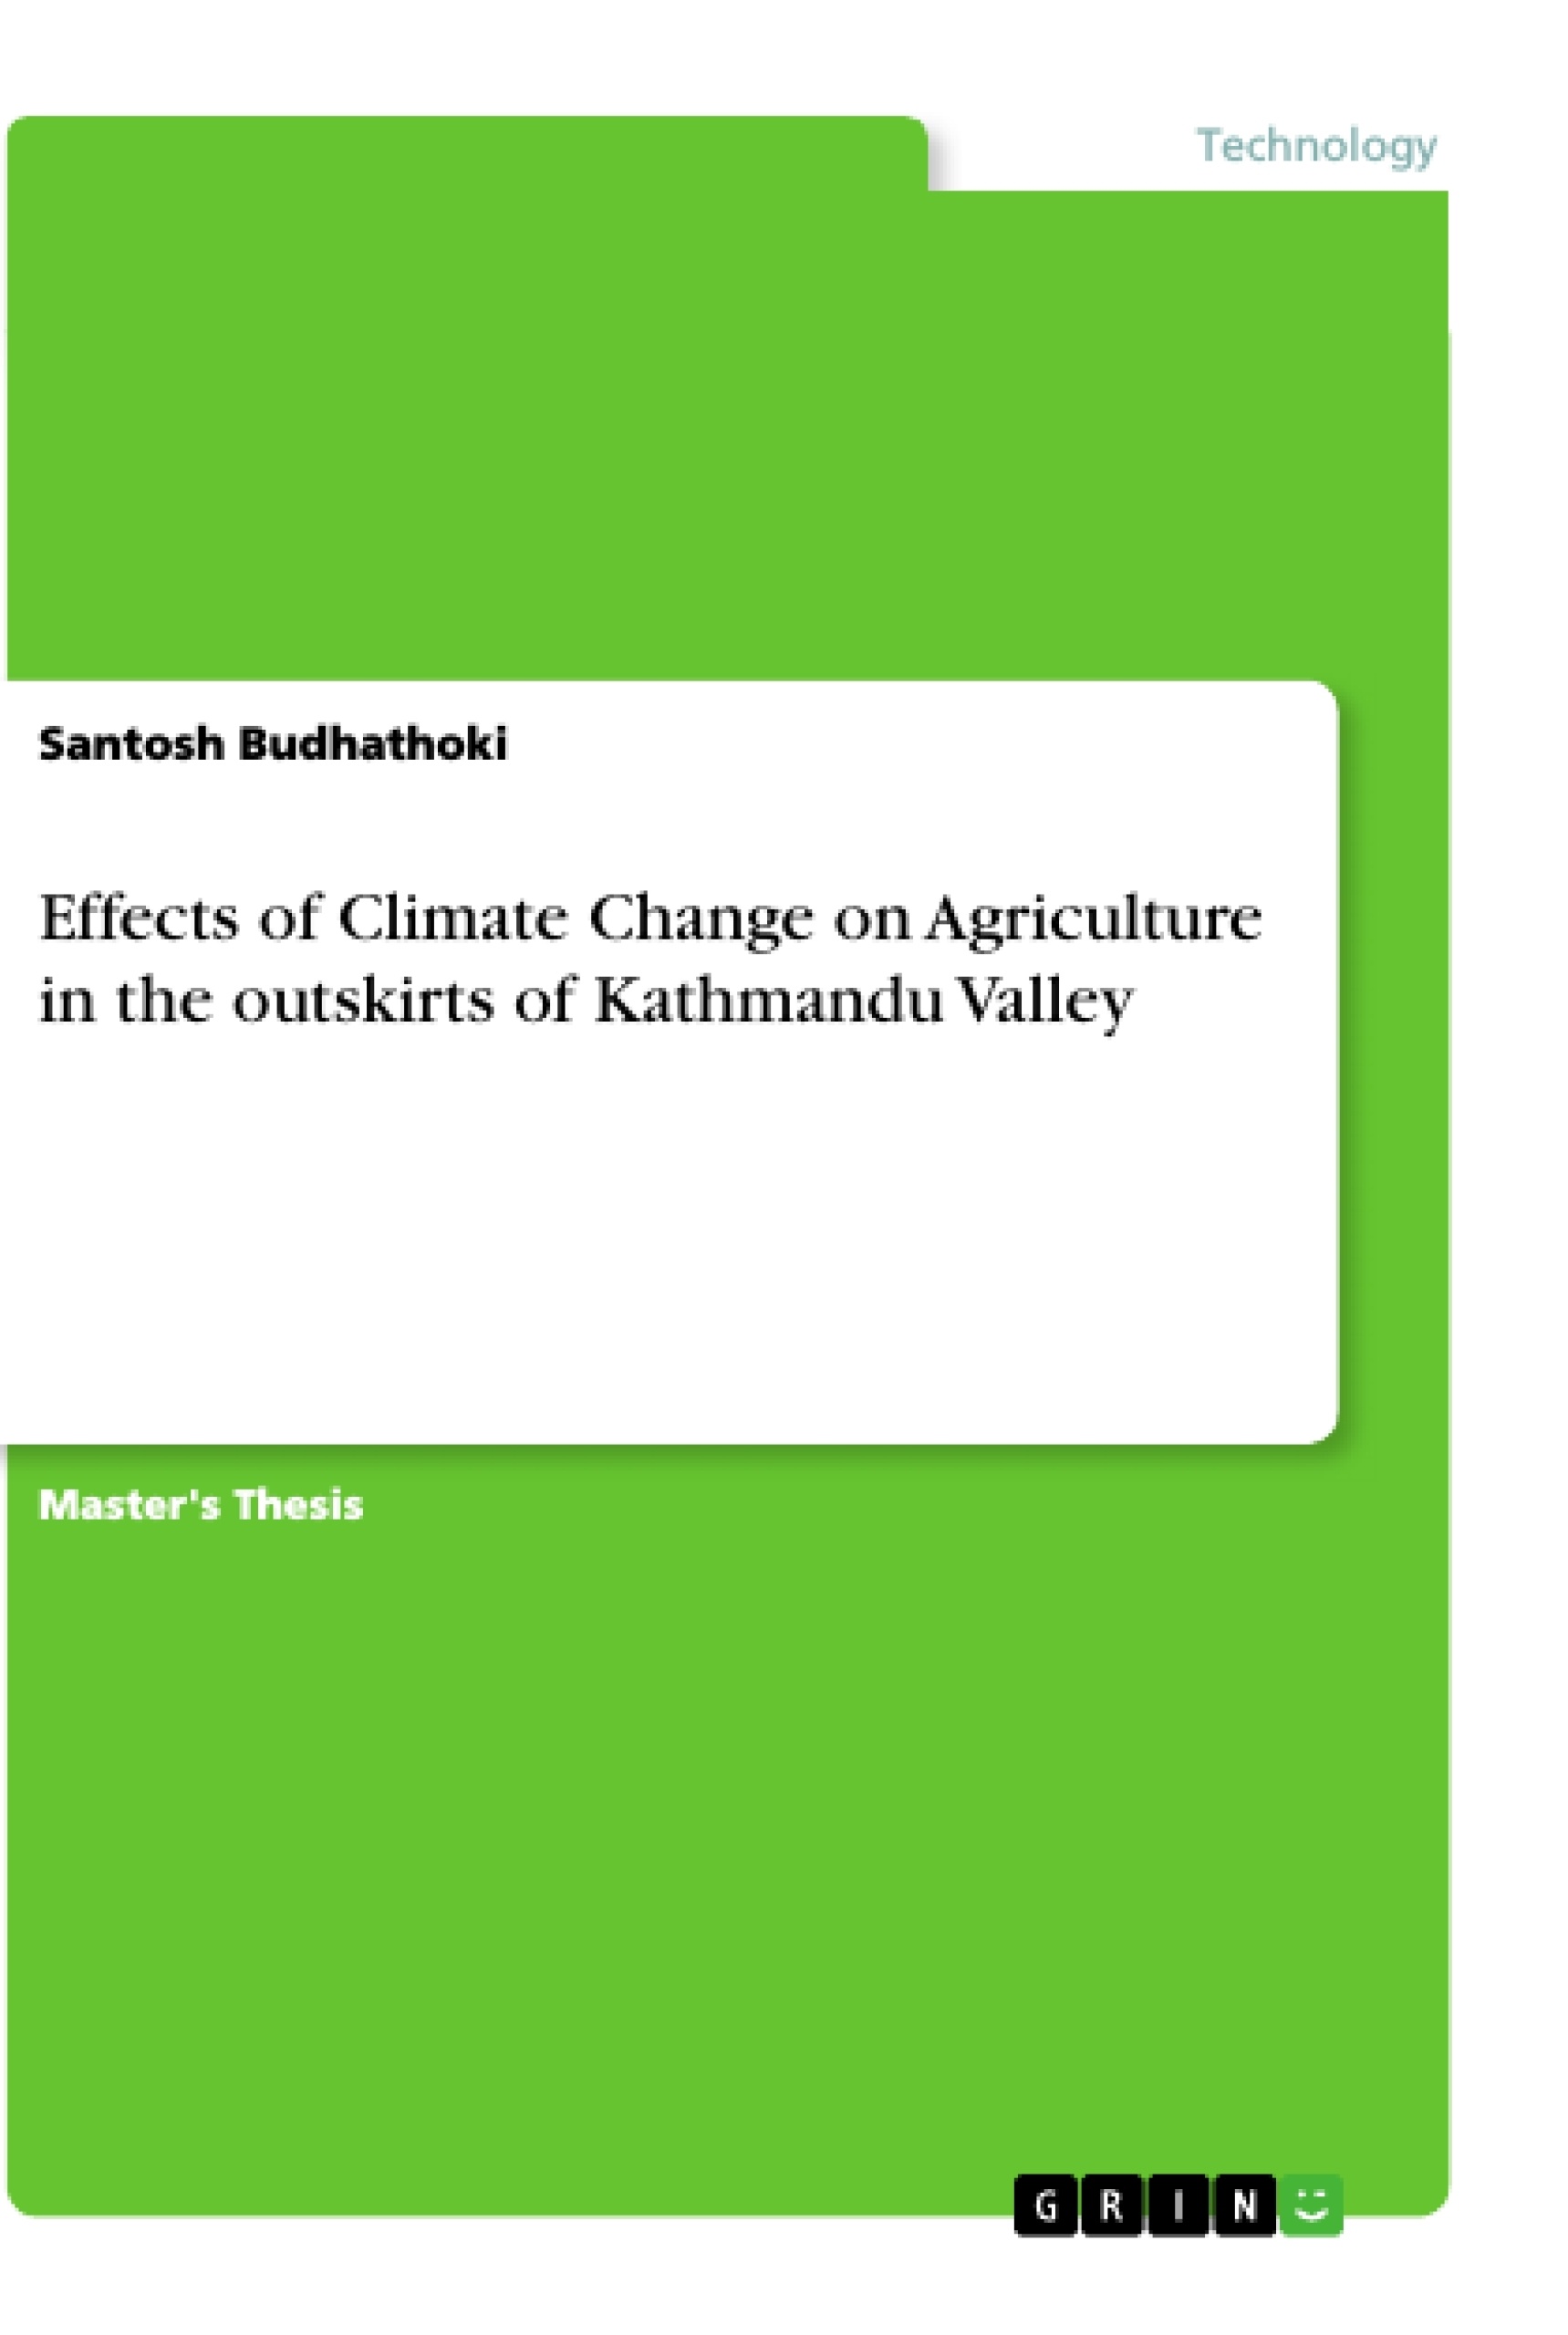 Titre: Effects of Climate Change on Agriculture in the outskirts of Kathmandu Valley